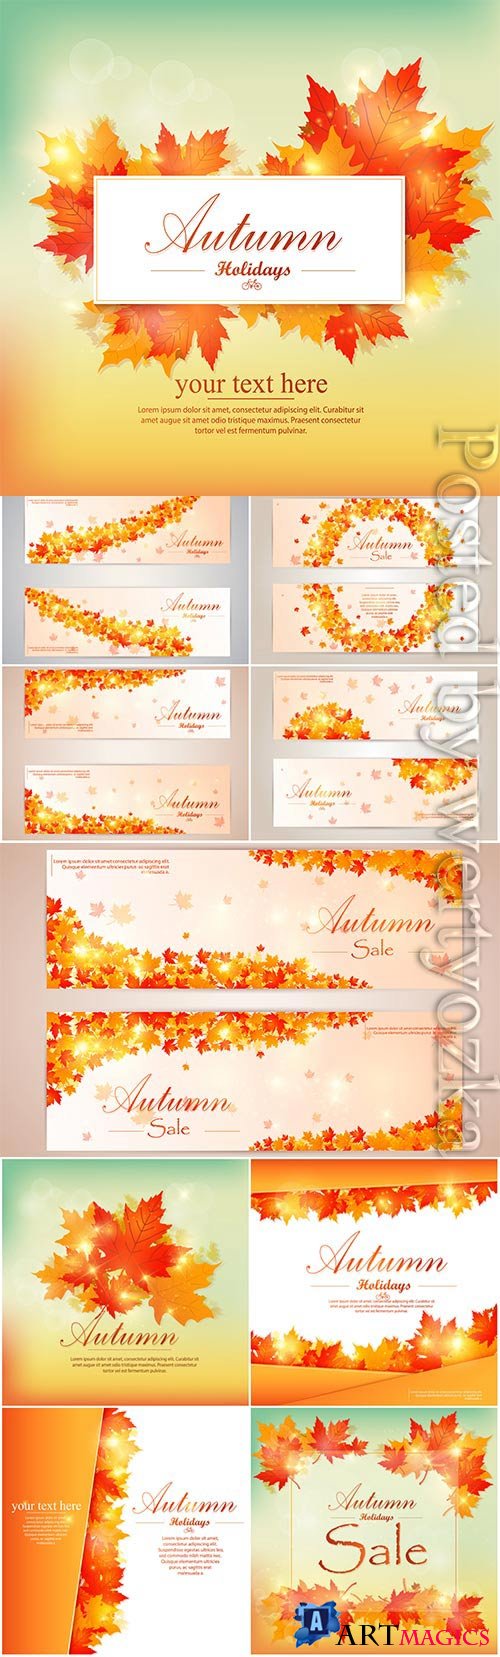 Autumn backgrounds and banners with yellow leaves in vector